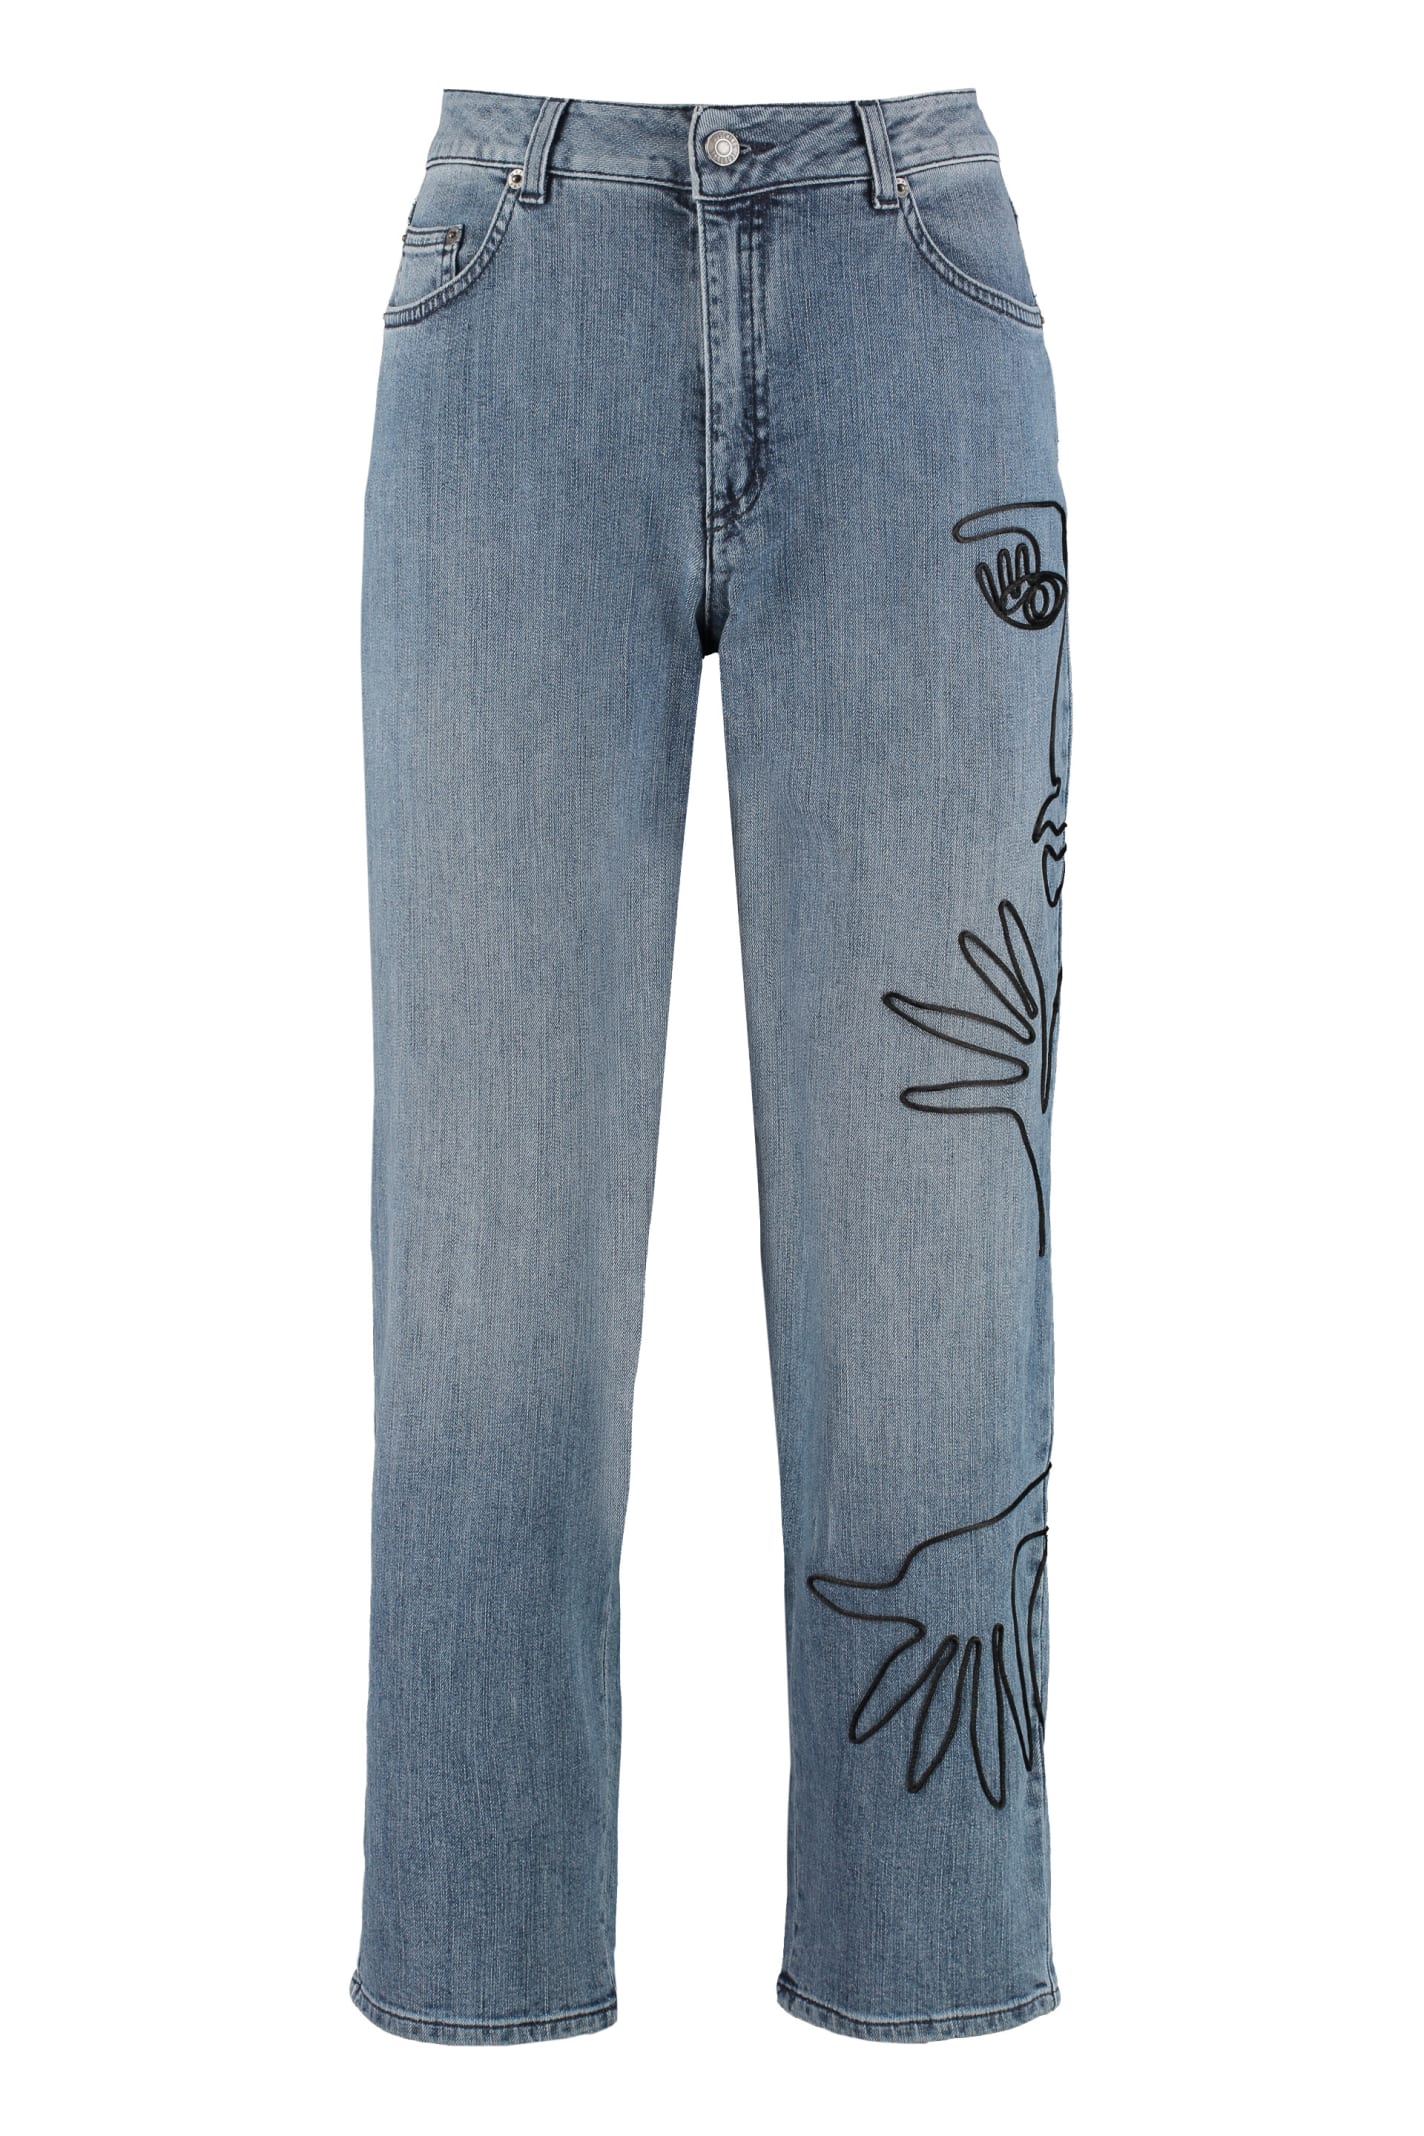 MOSCHINO EMBROIDERED MUM FIT JEANS,11271738